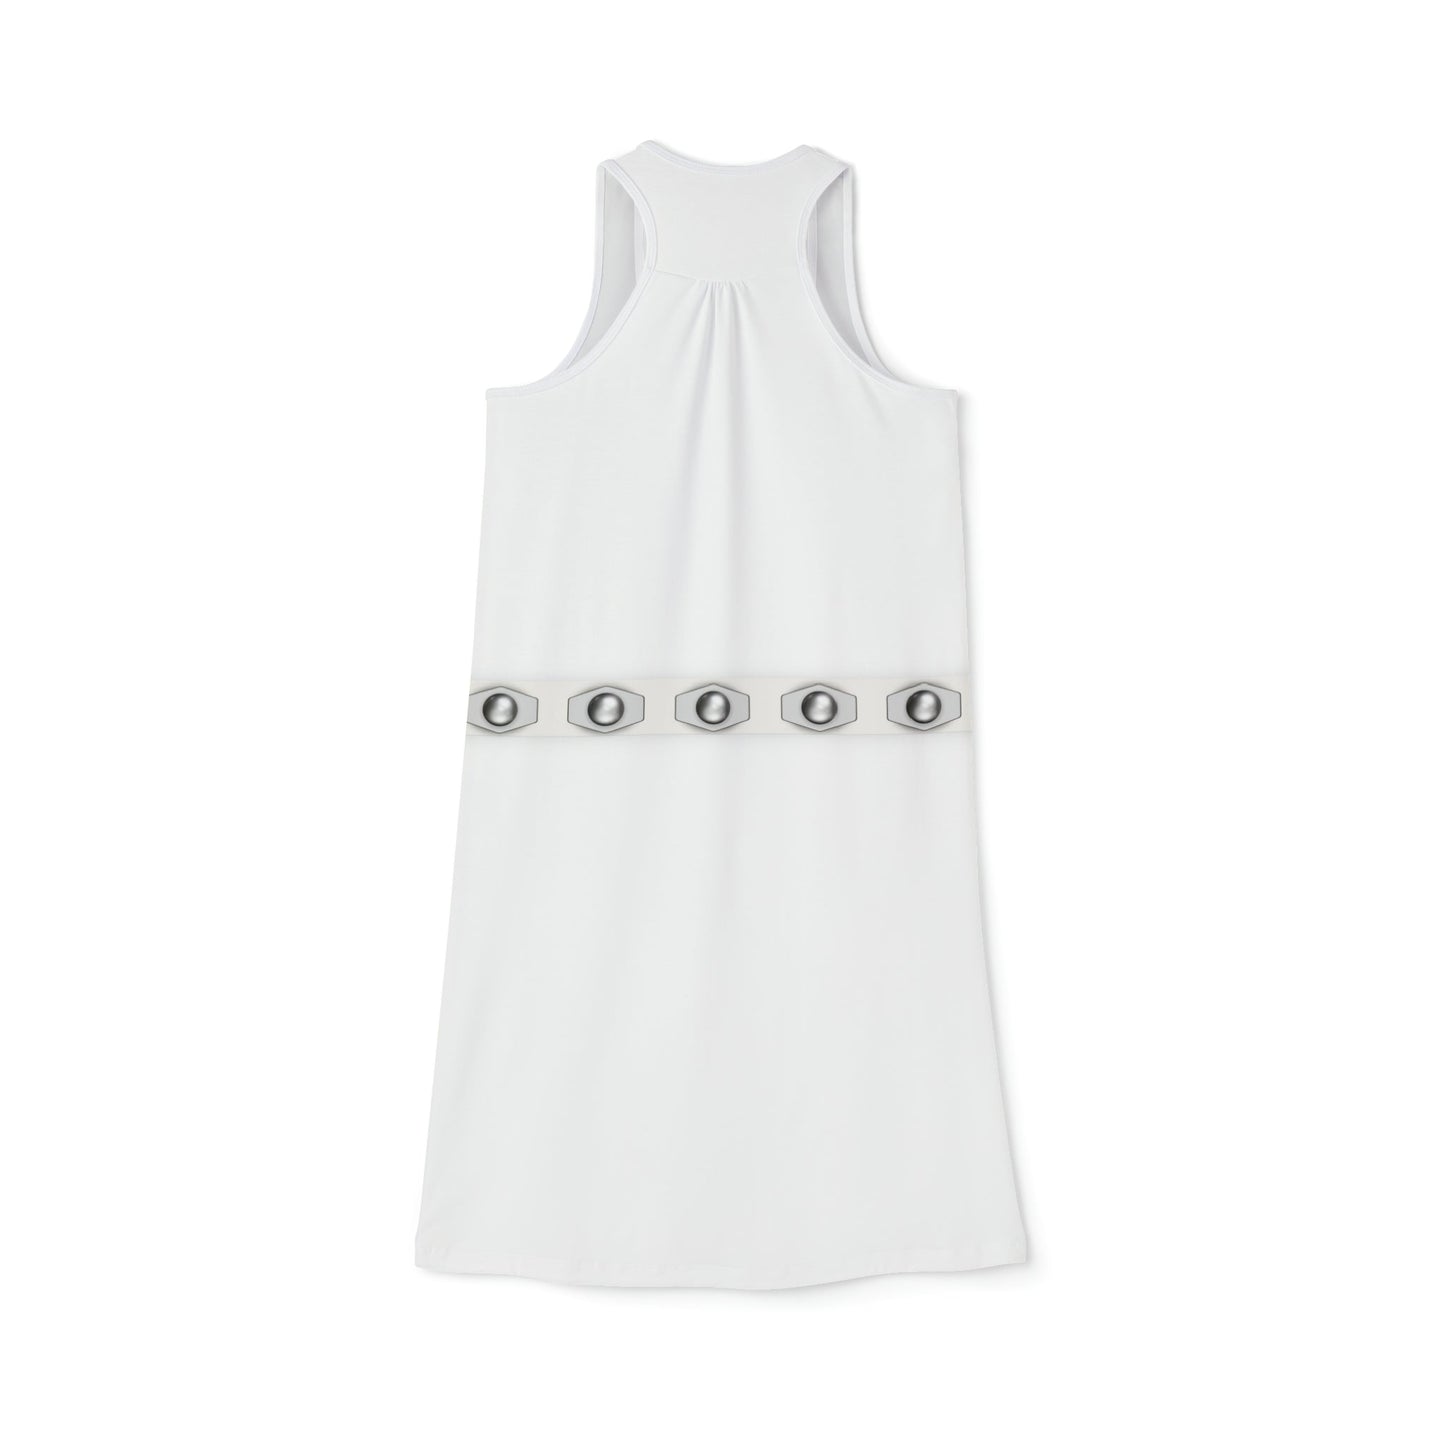 The Leia Women's Racerback Dress All Over PrintAOPTank TopWrong Lever Clothing